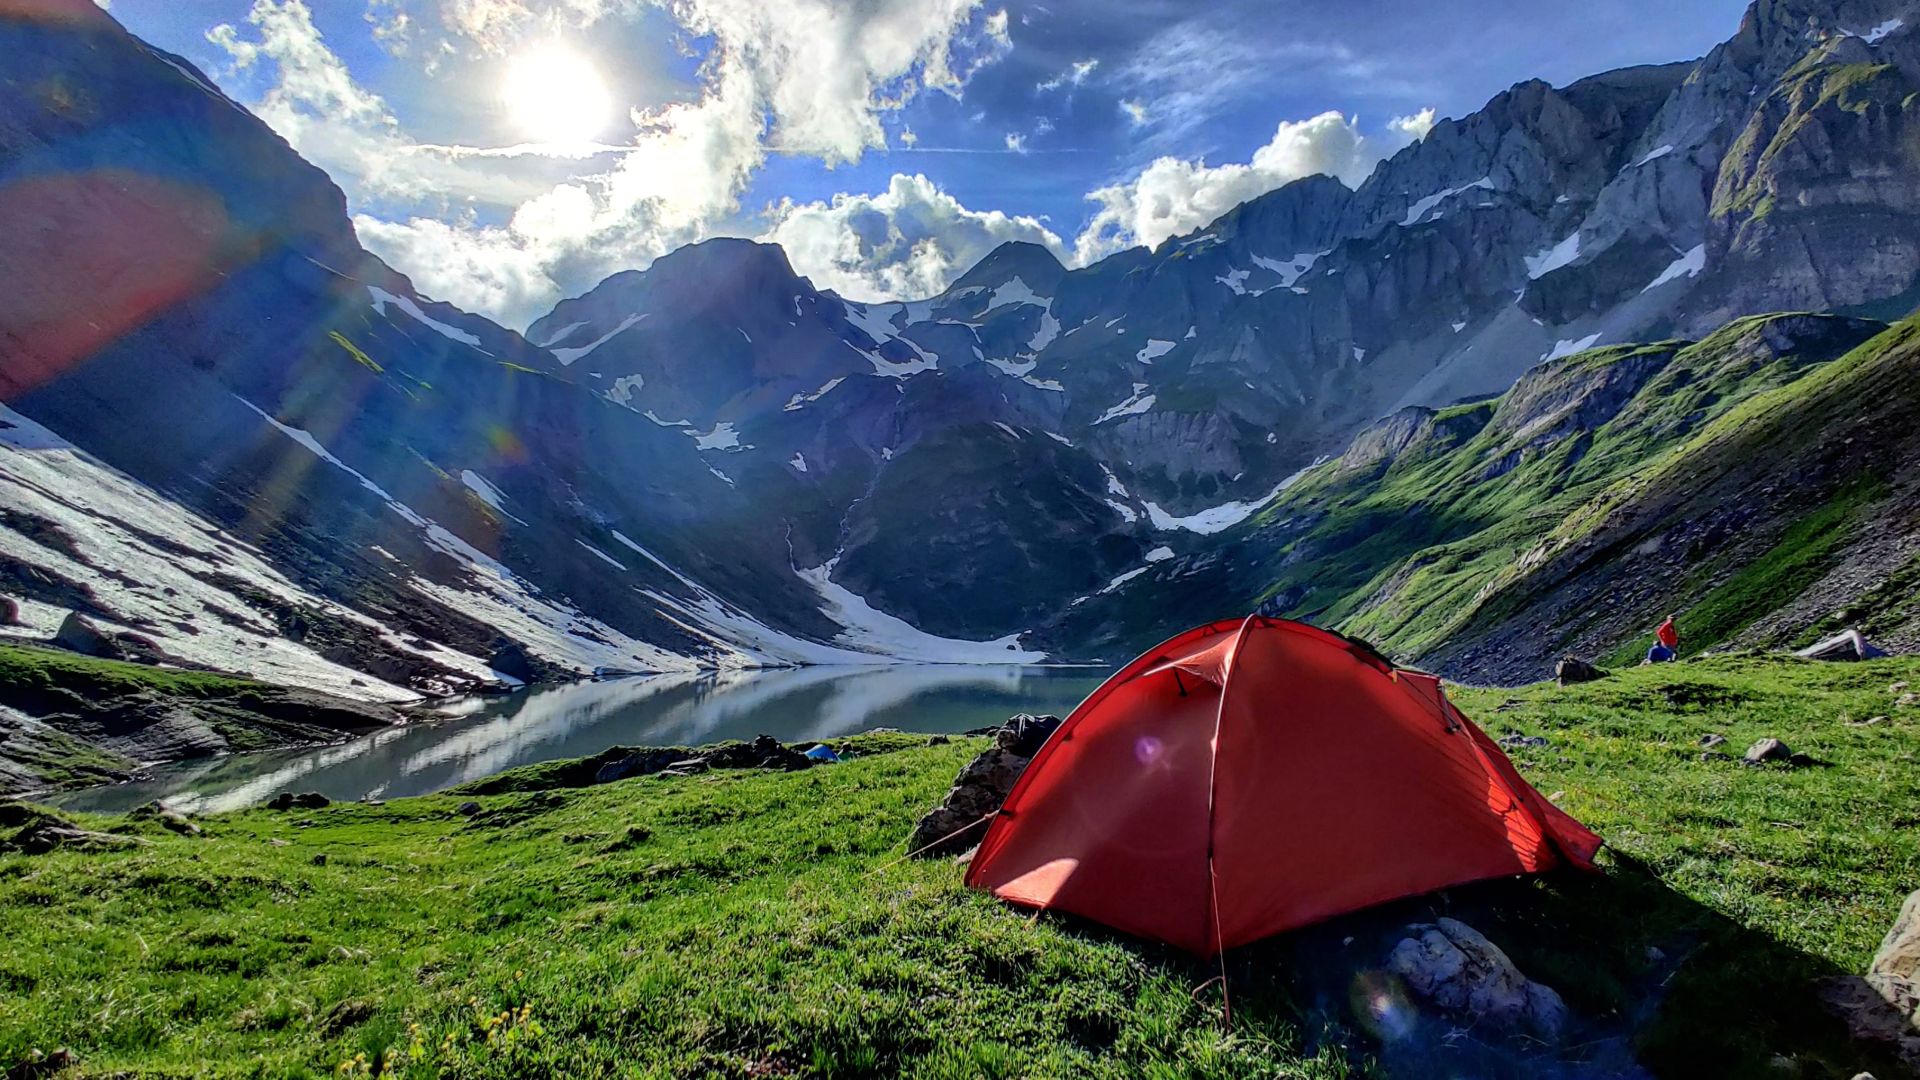 8 of the best and most beautiful countries for wild camping